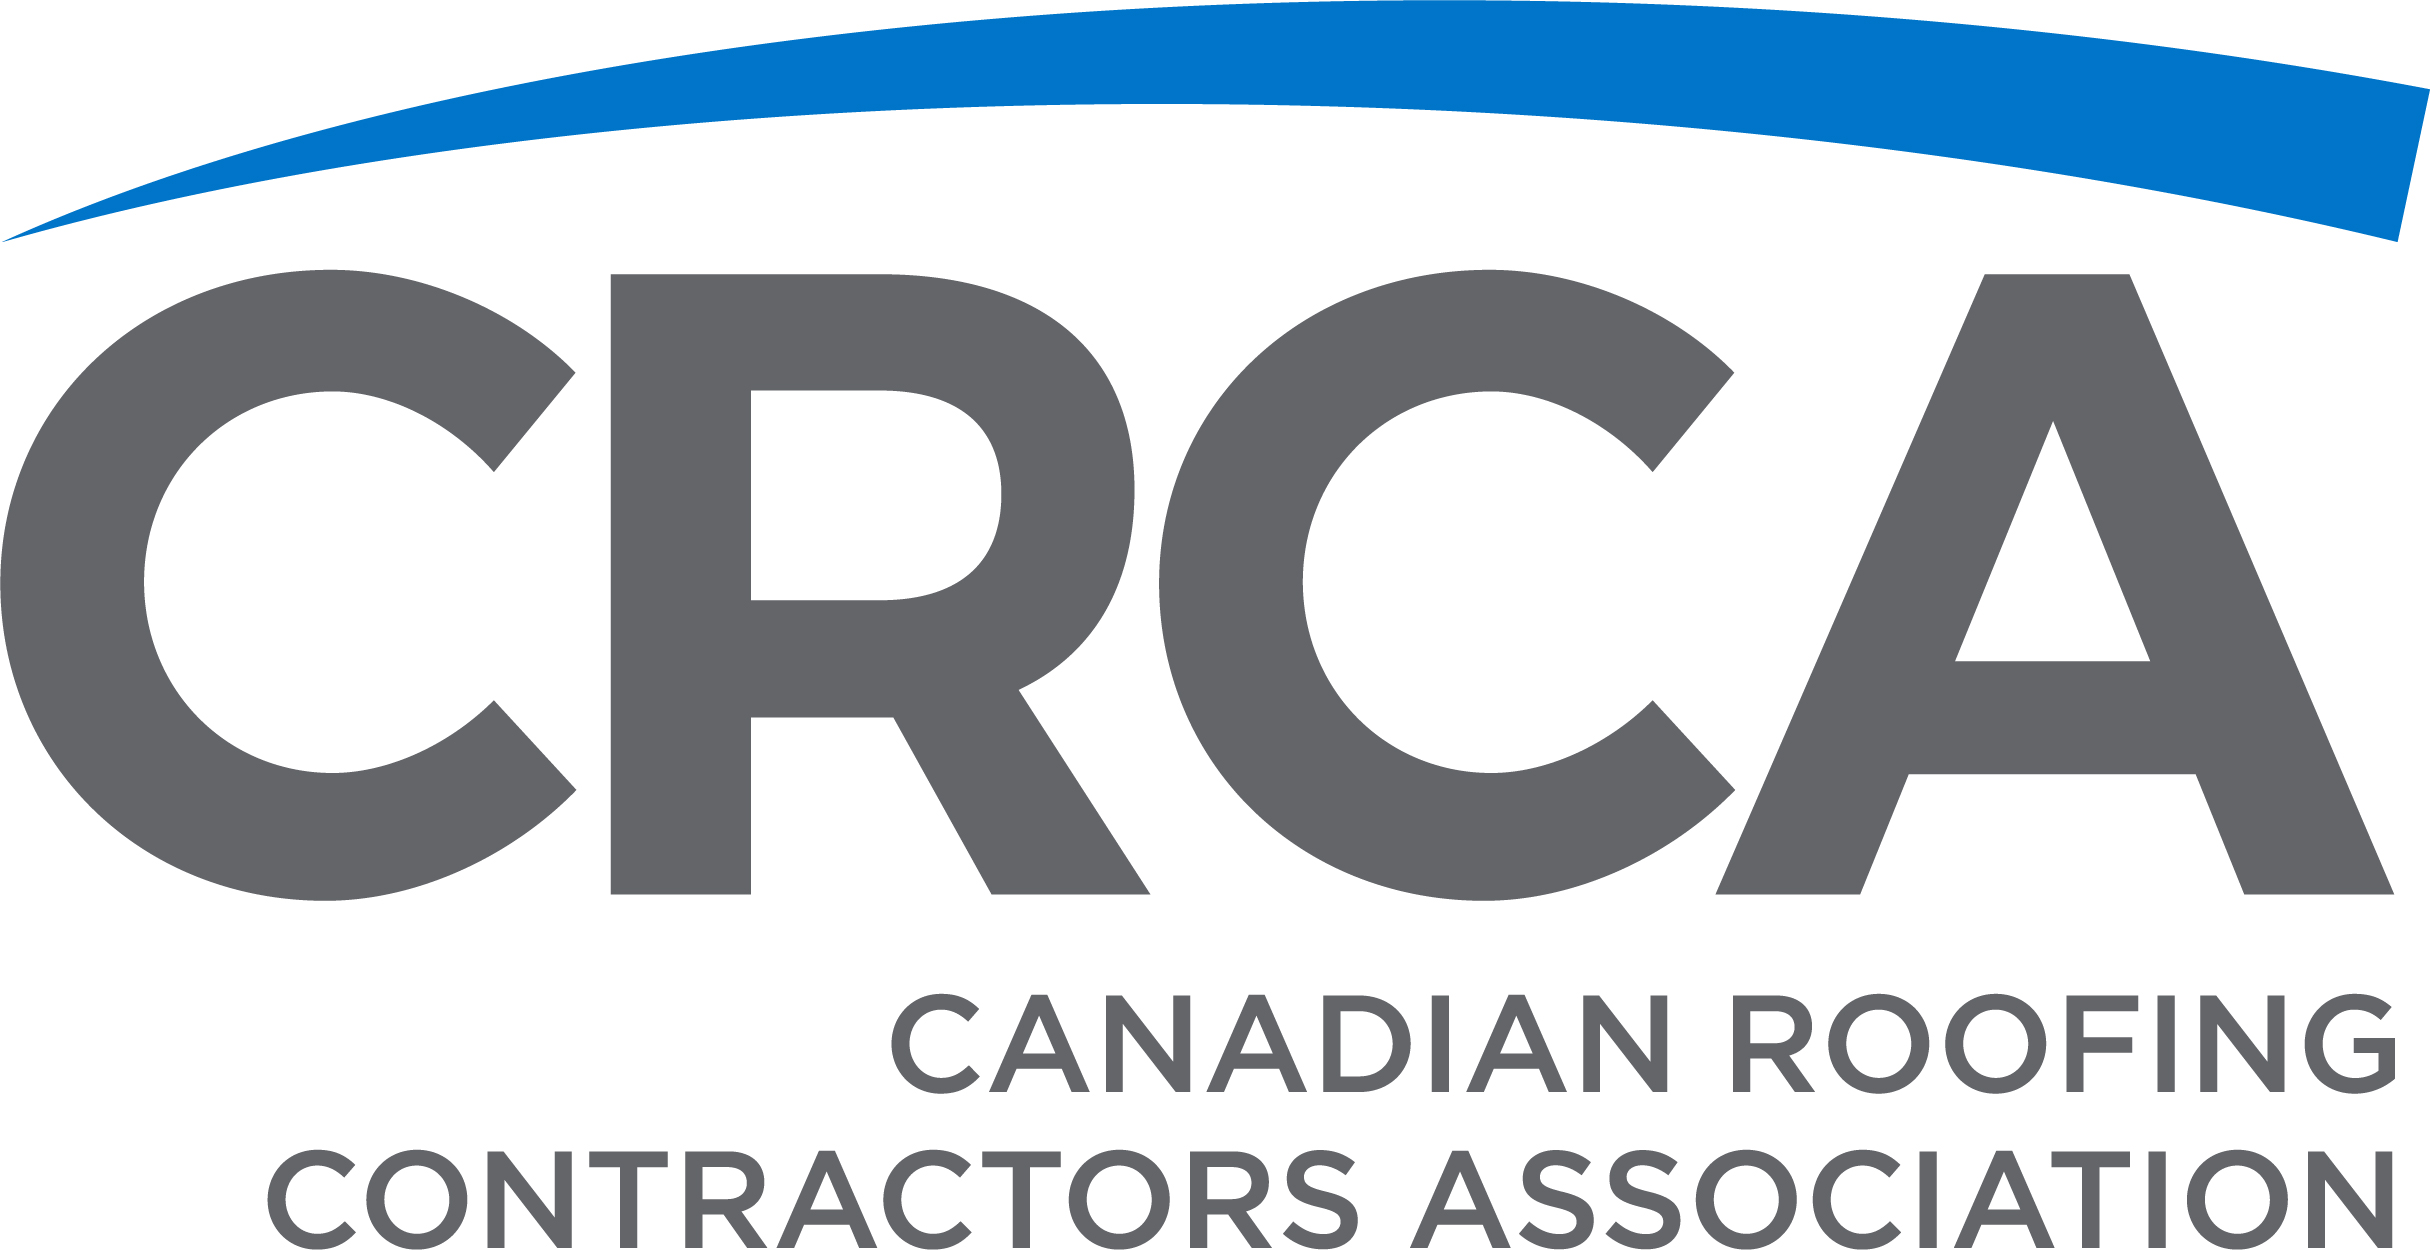 CRCA Announces The 4th Annual National Roofing Week in Canada